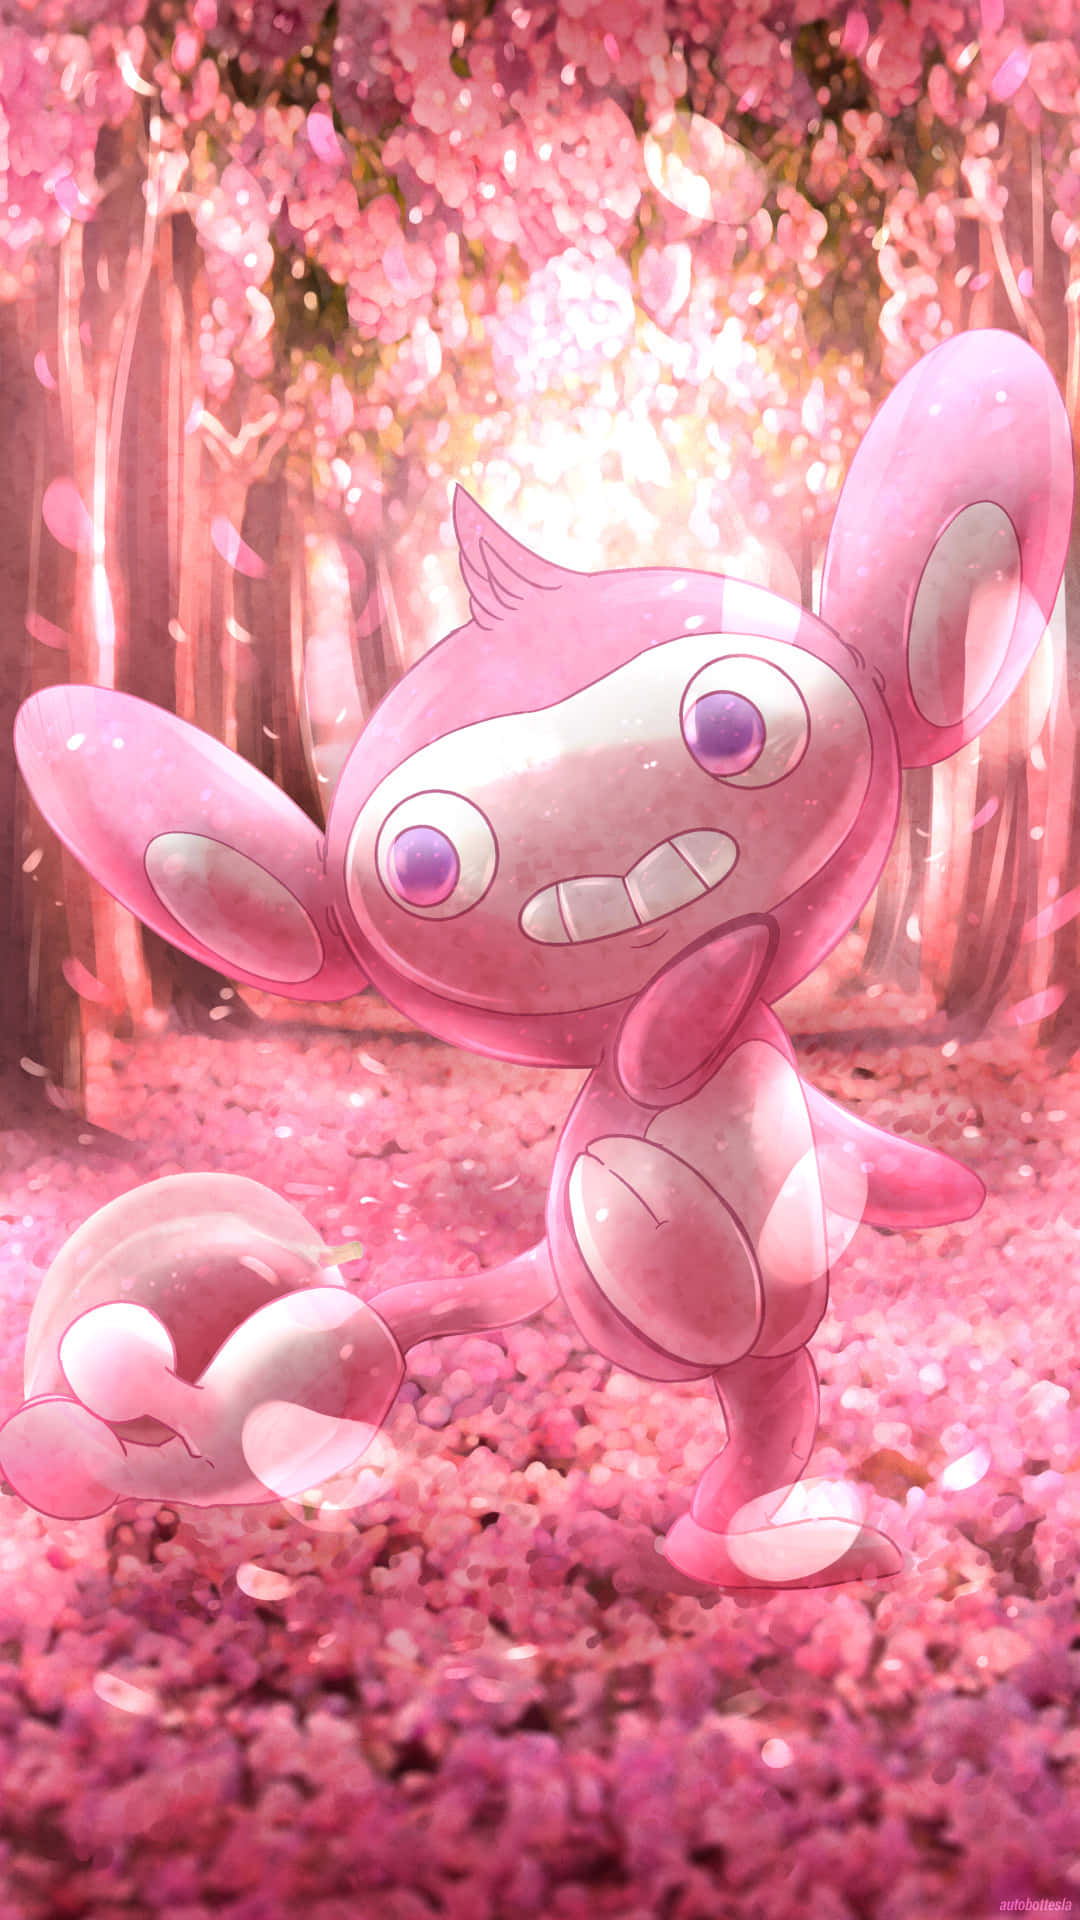 A Cheerful Aipom Swinging On The Tree Wallpaper